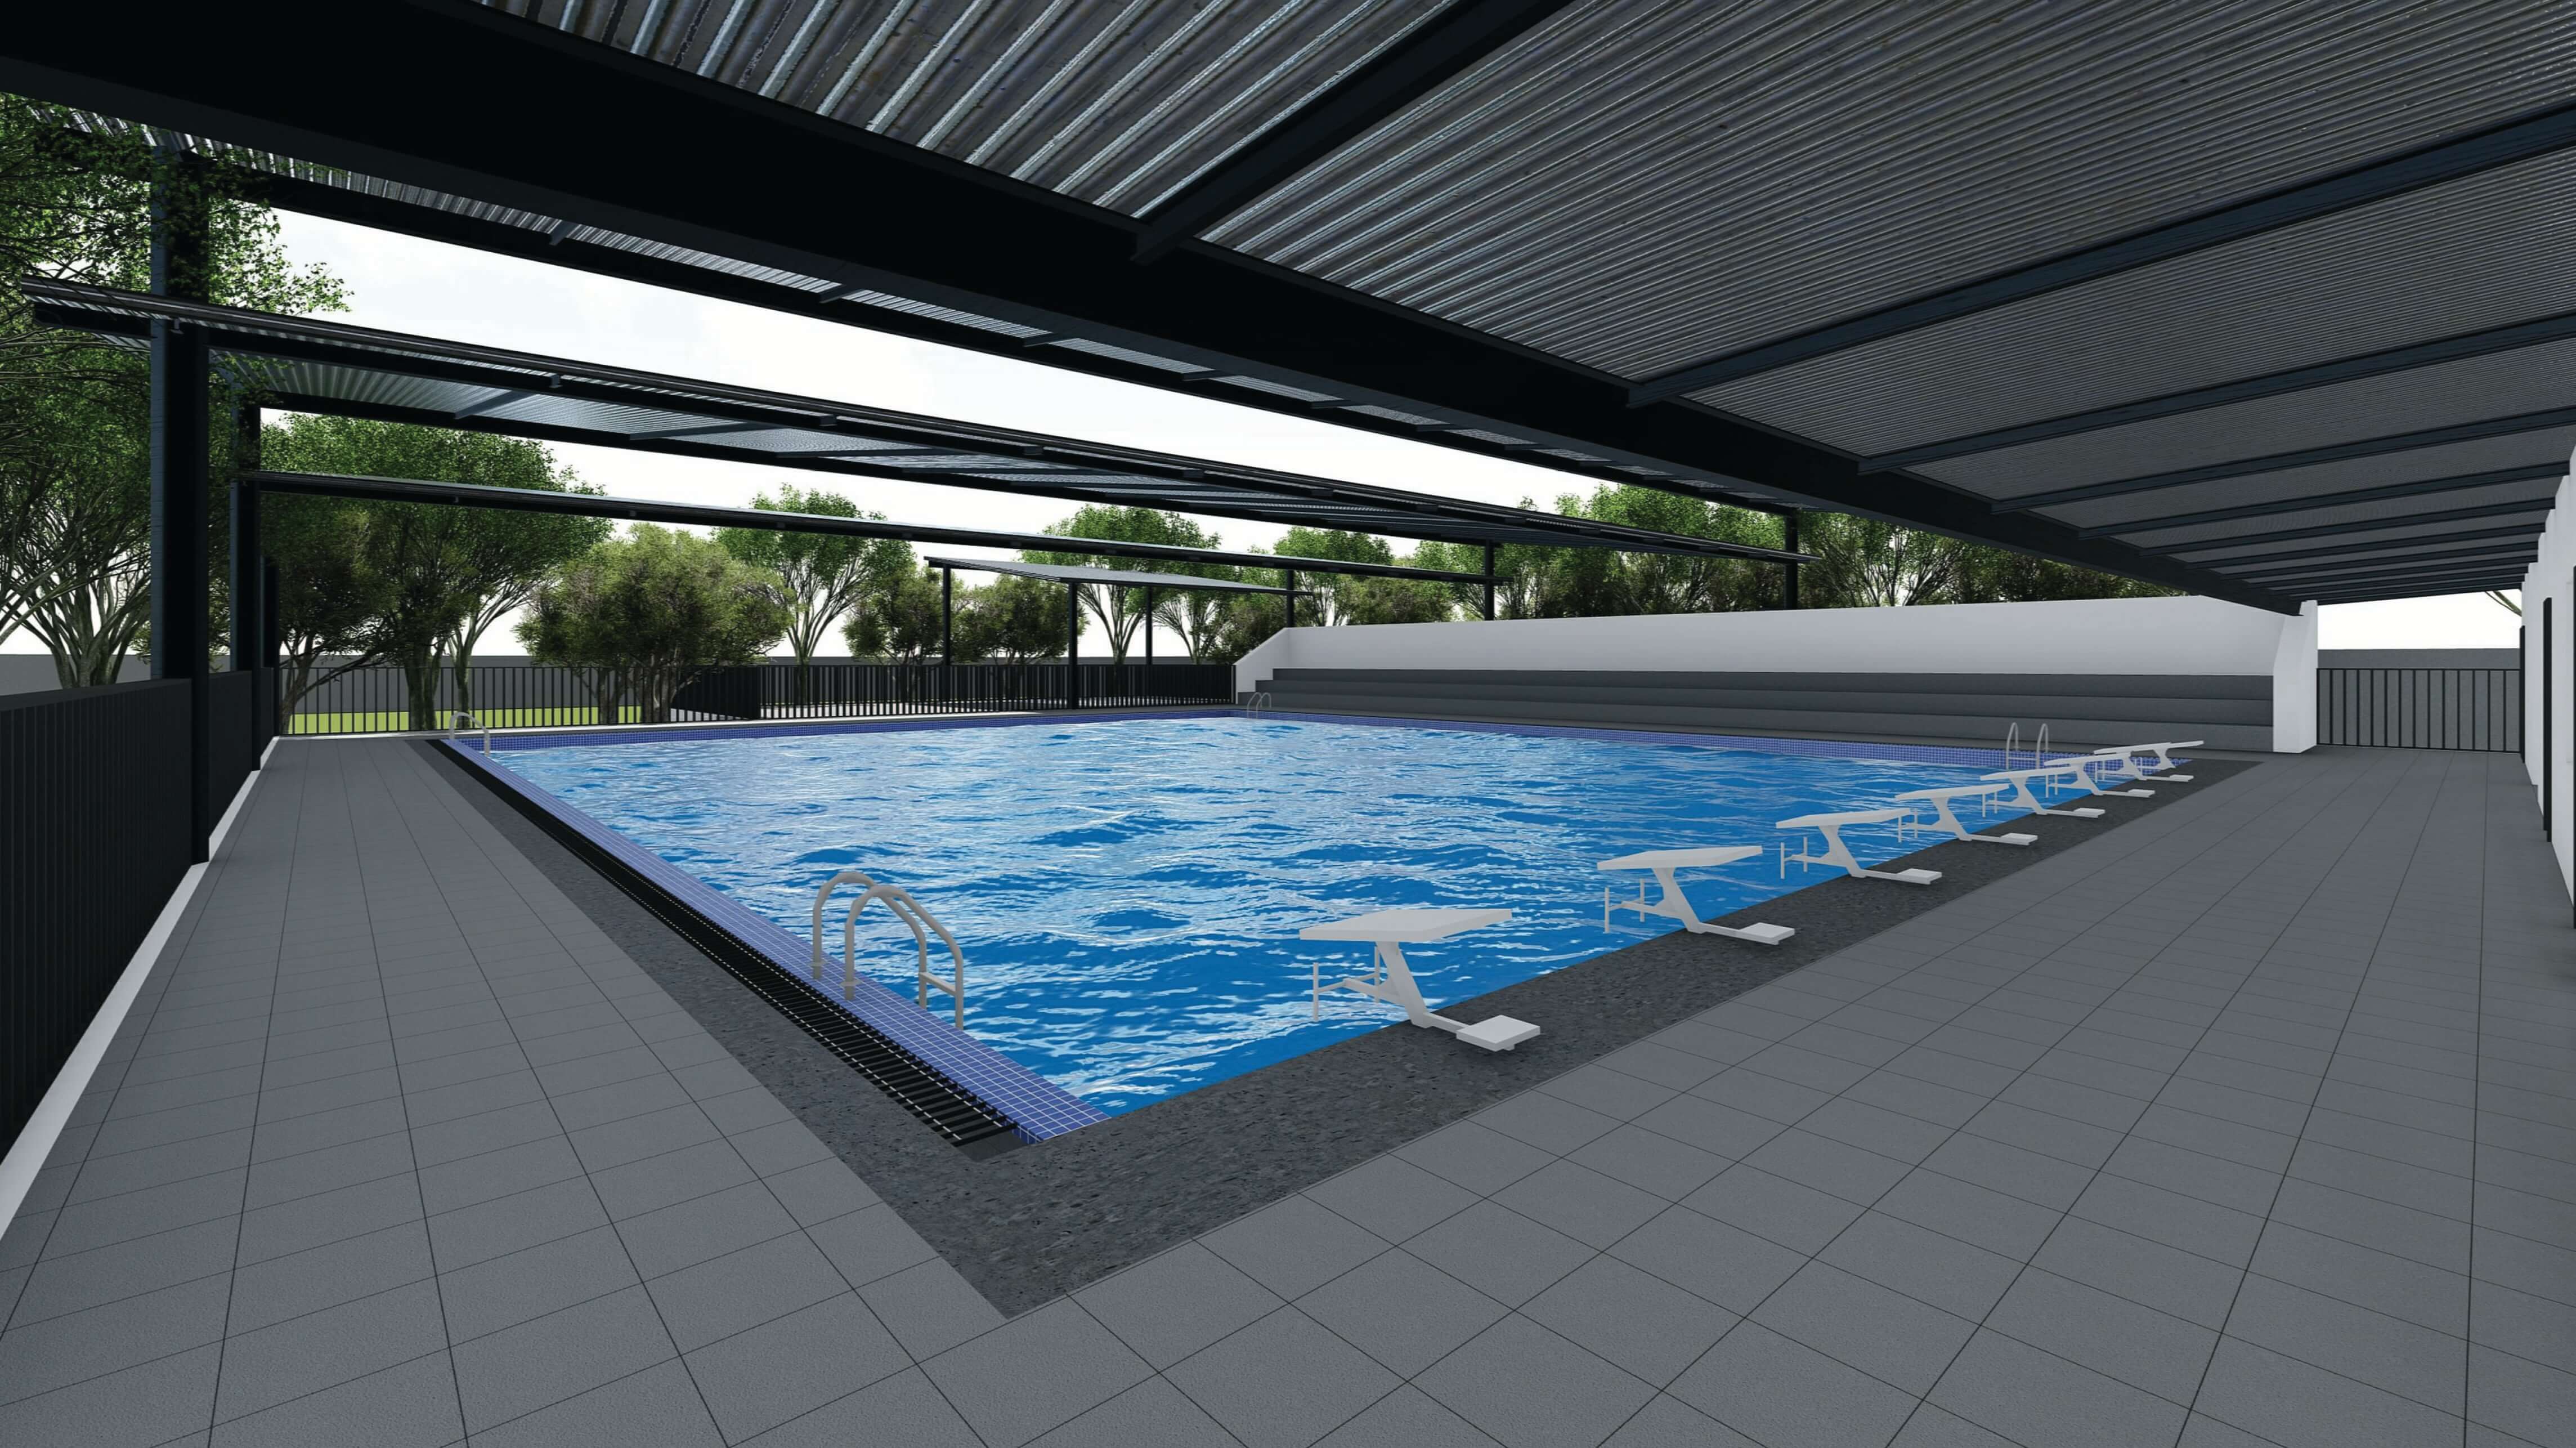 New Northbridge Aquatics Centre to provide students with world-class learning and training facility-new-northbridge-aquatics-centre-to-provide-students-with-world-class-learning-and-training-facility-NorthBridge Swimming Pool Concept OPTION 3B_E 1 110